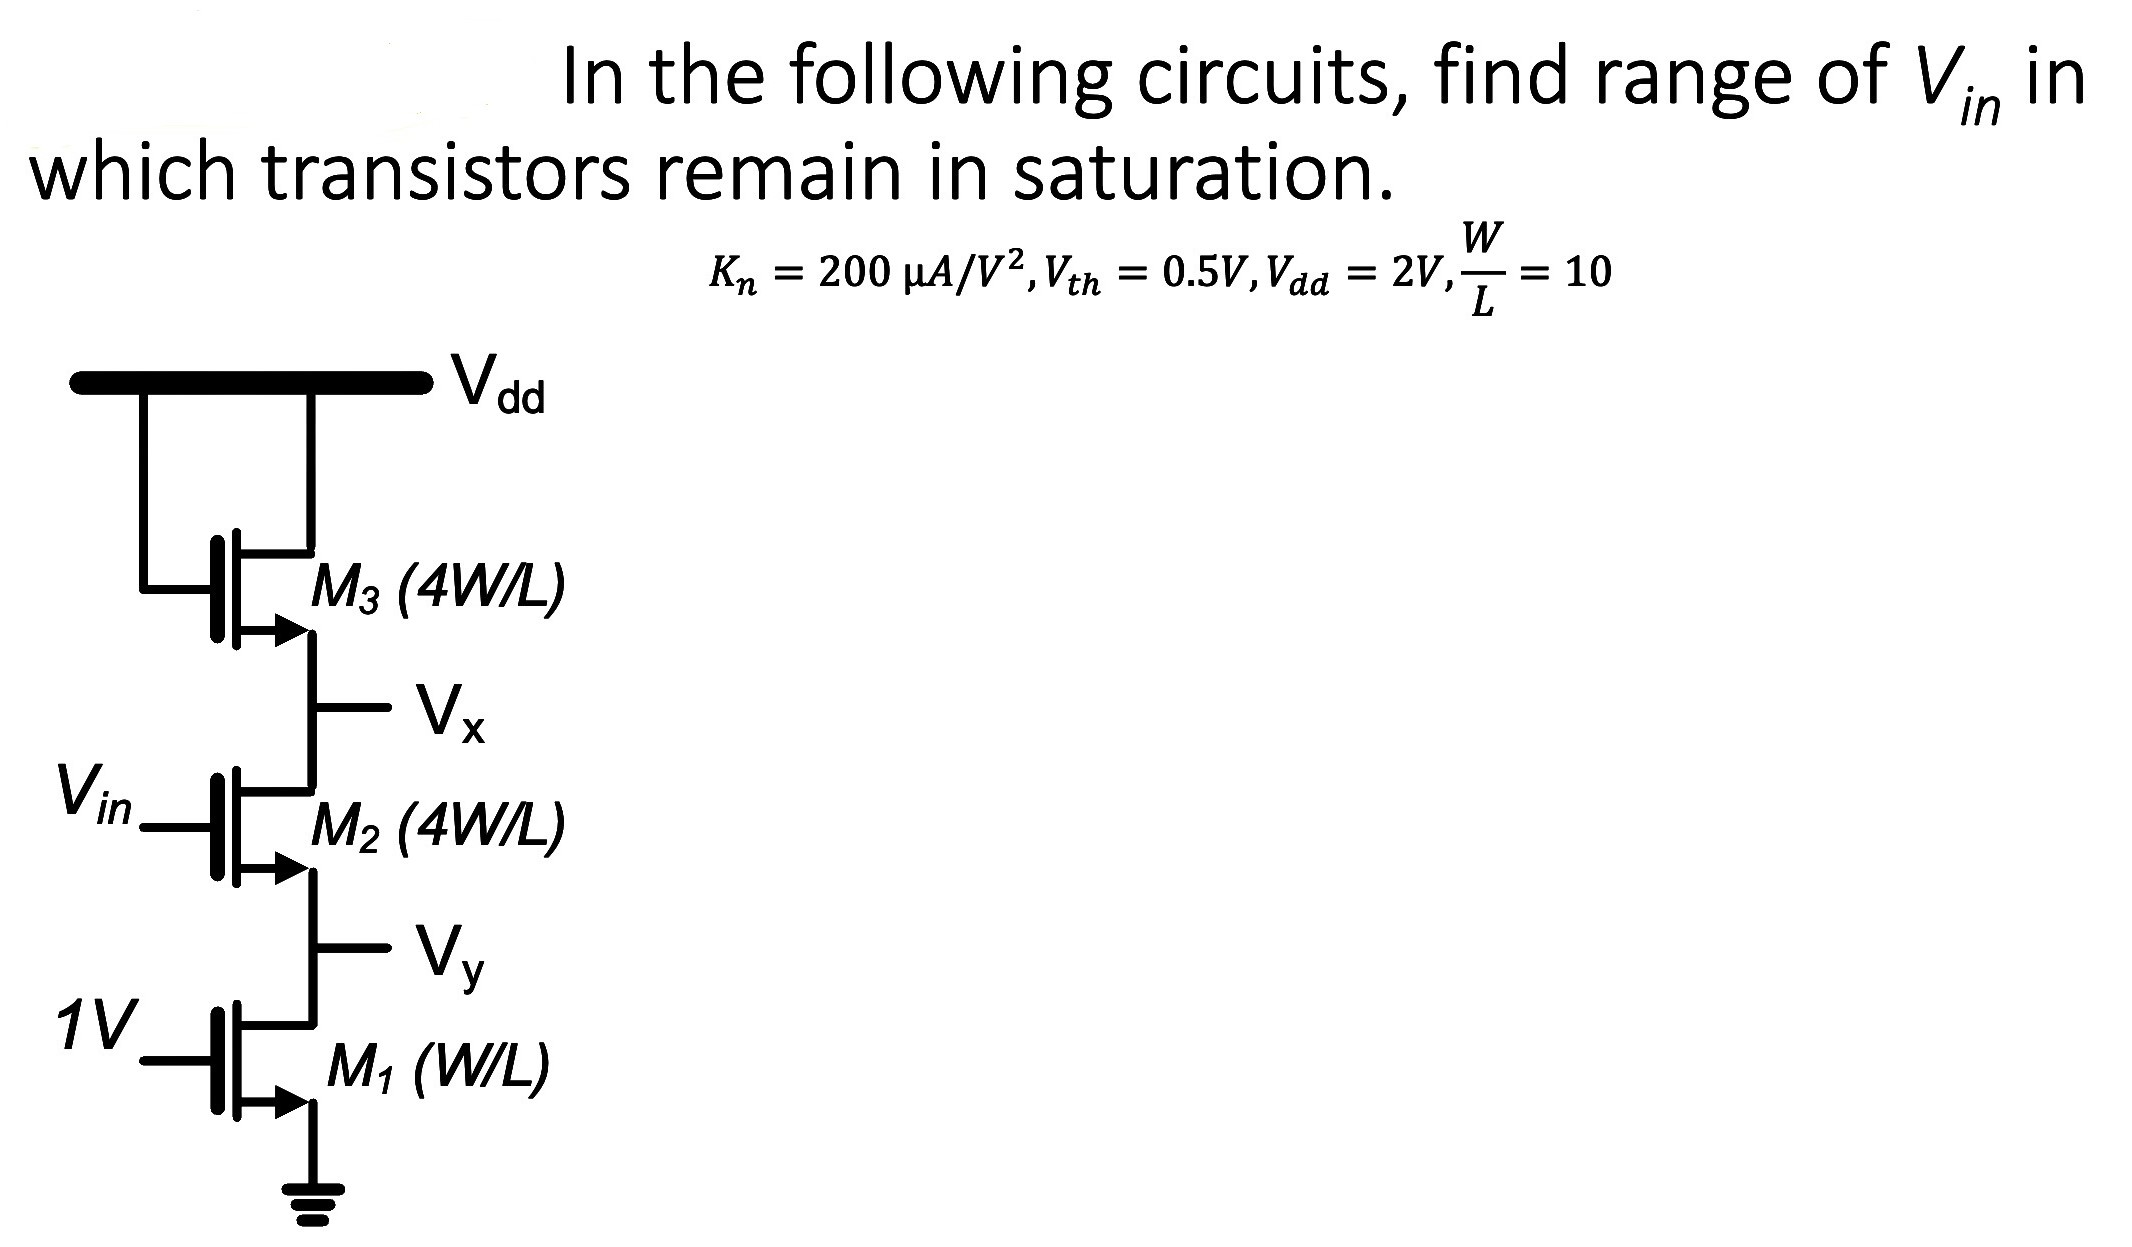 In the following circuits, find range of Vin  in which transistors remain in saturation. Kn = 200 uA/V2, Vth = 0.5 V, Vdd = 2 V, W/L = 10